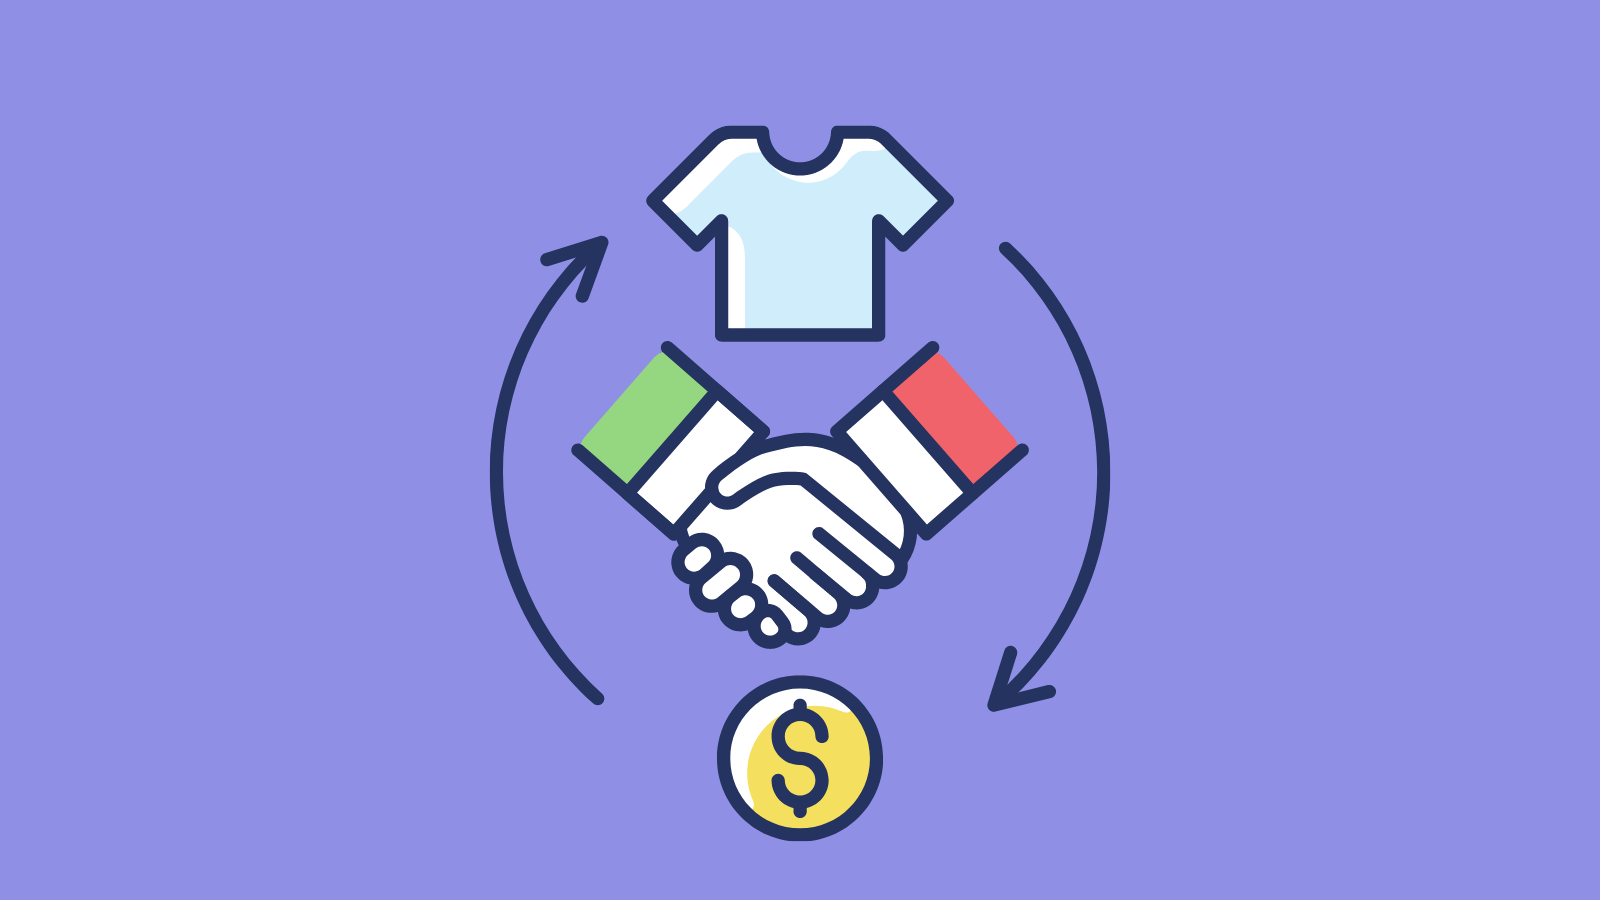 A T-shirt, a handshake icon, and a dollar sign encircled by two arrows